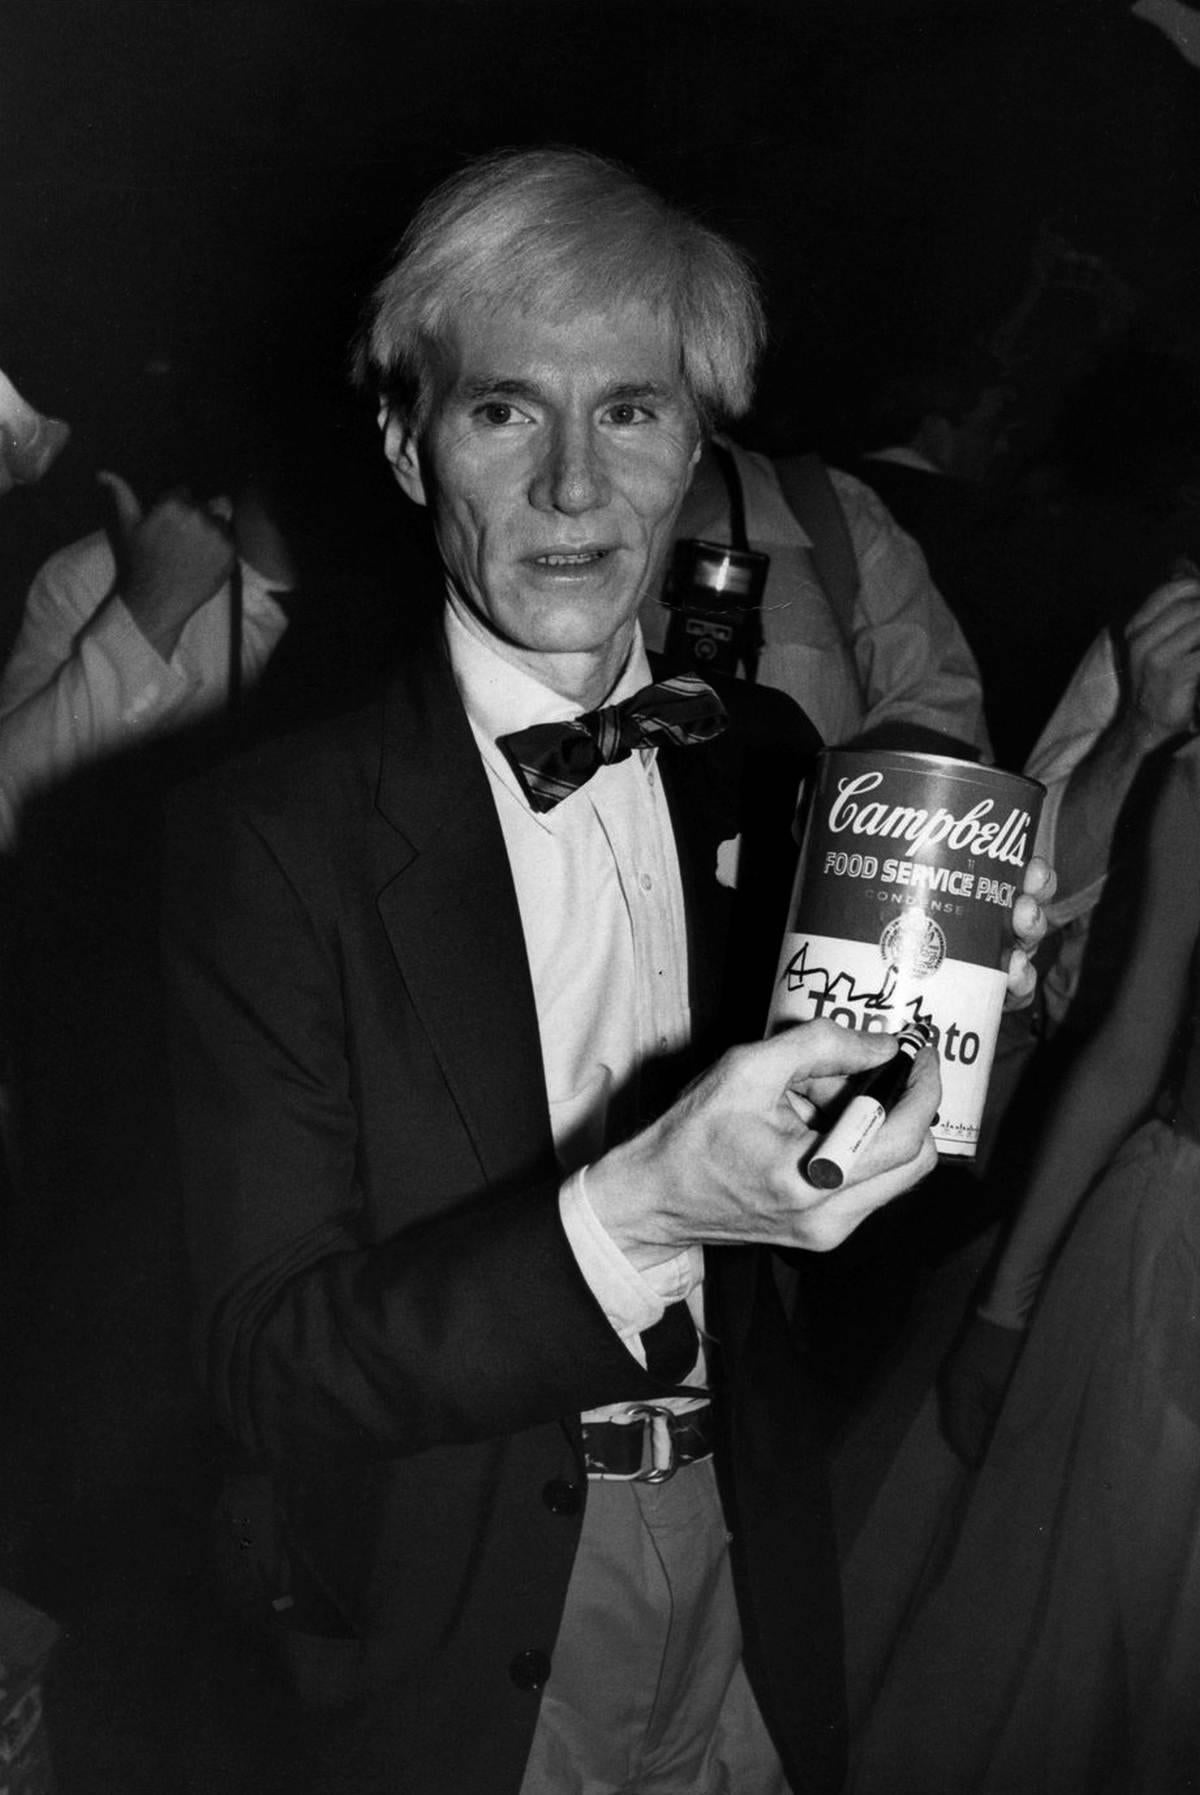 Adam Scull Black and White Photograph - Andy Warhol Autographing a Campbells Soup Can Fine Art Print